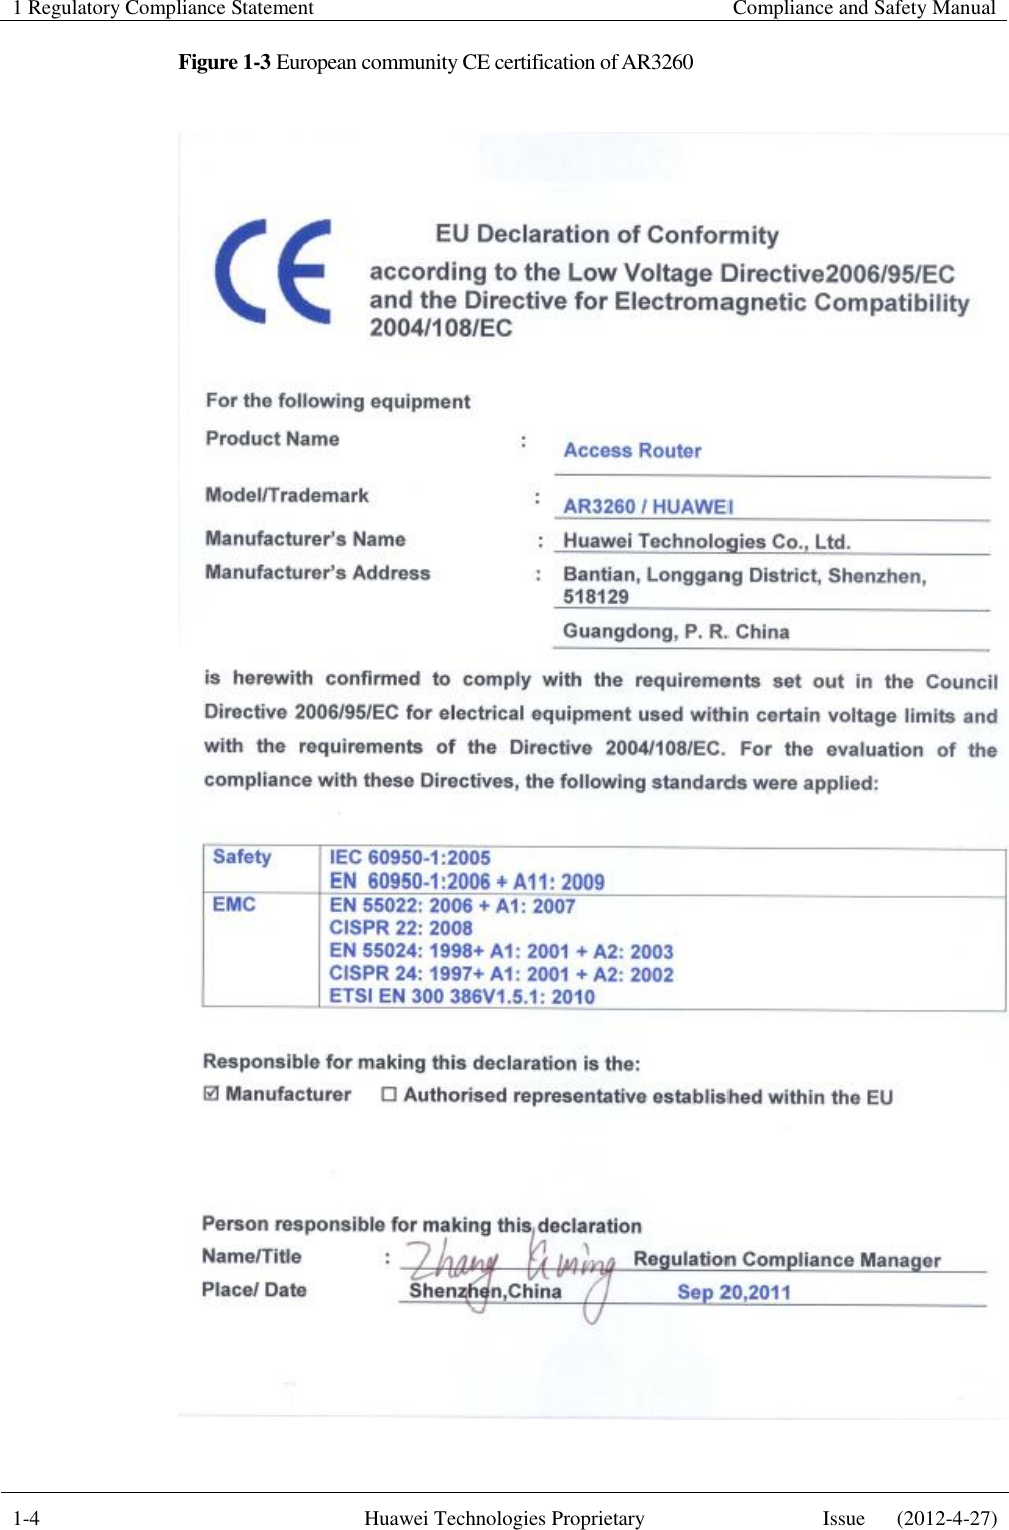 1 Regulatory Compliance Statement    Compliance and Safety Manual  1-4 Huawei Technologies Proprietary Issue      (2012-4-27)  Figure 1-3 European community CE certification of AR3260   